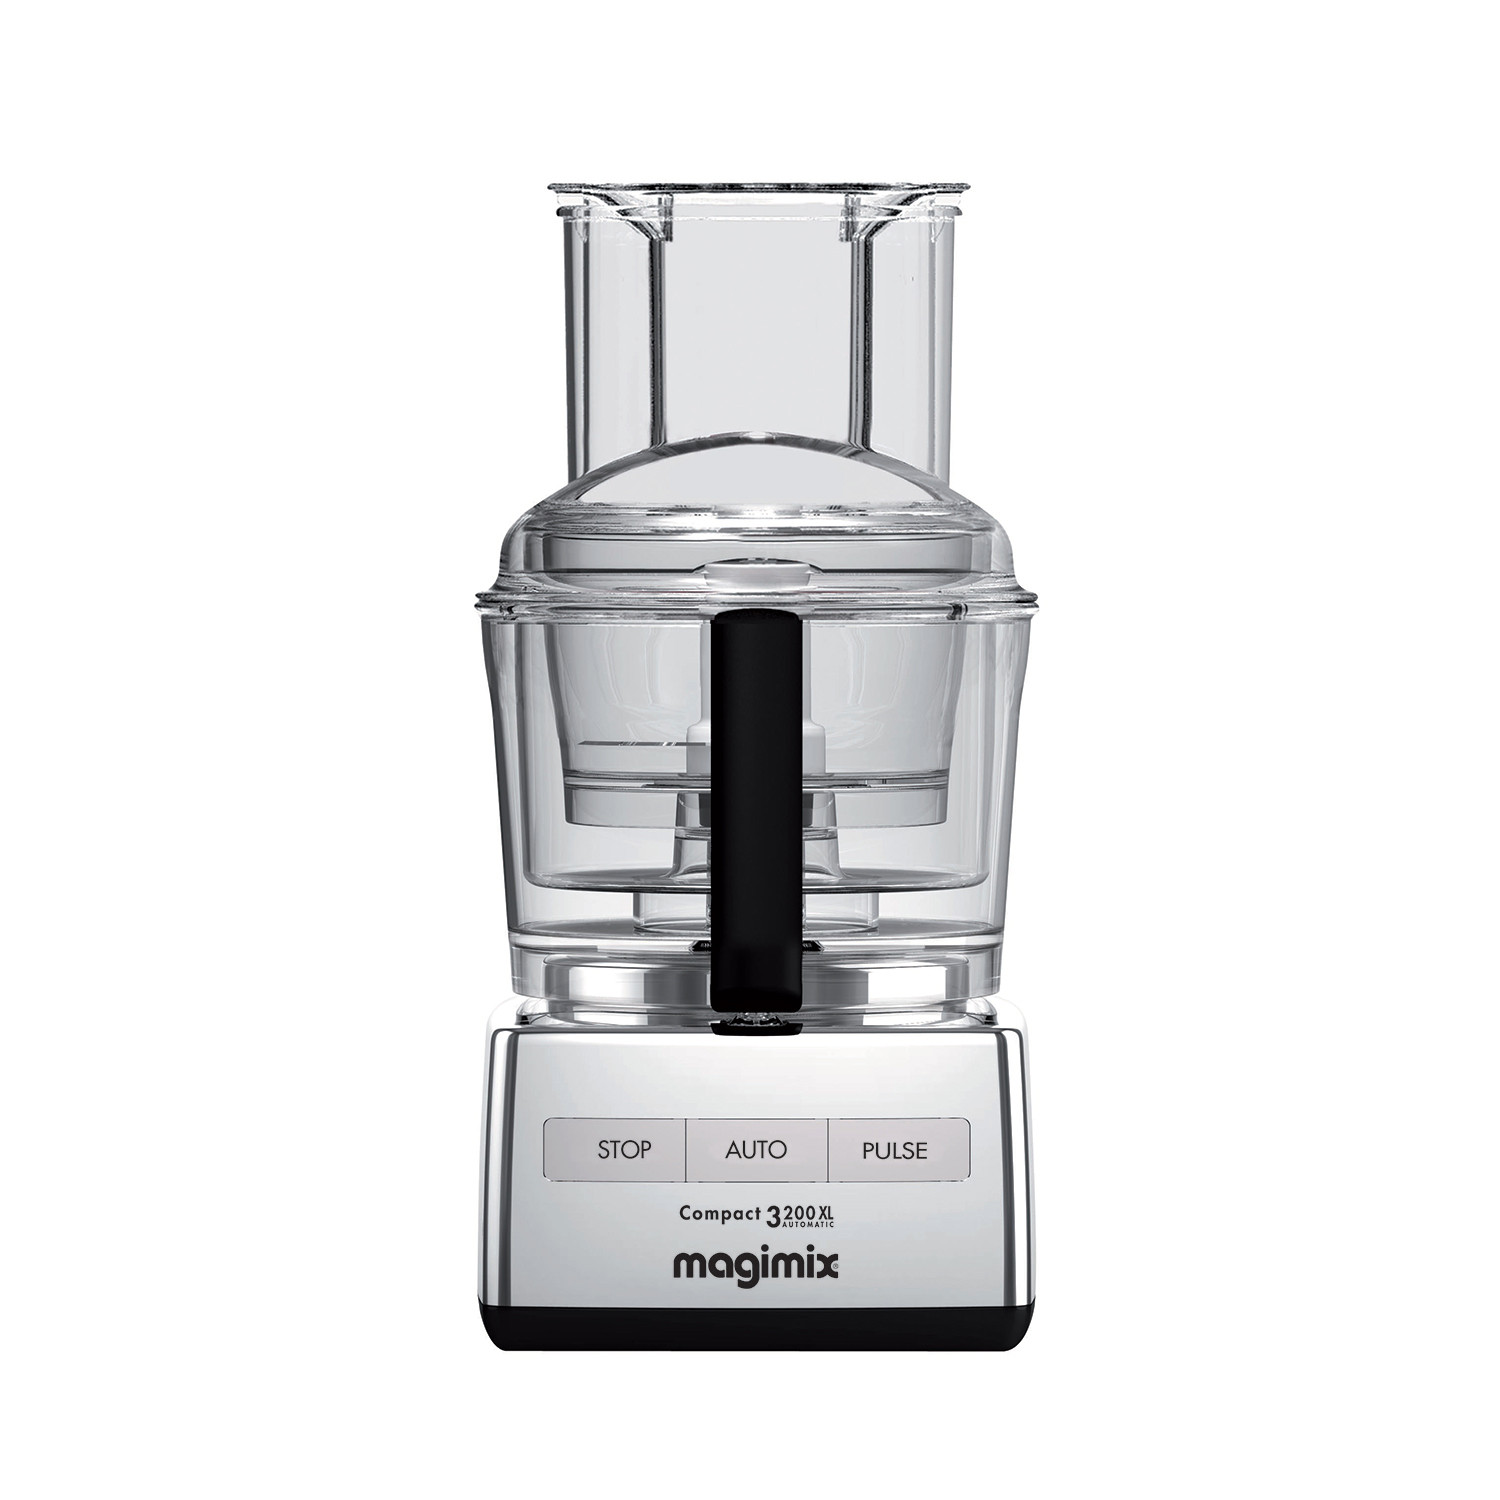 saai Knooppunt premier Compact 3200 XL + Citrus Press - Magimix by Robot-Coupe - Touch of Modern